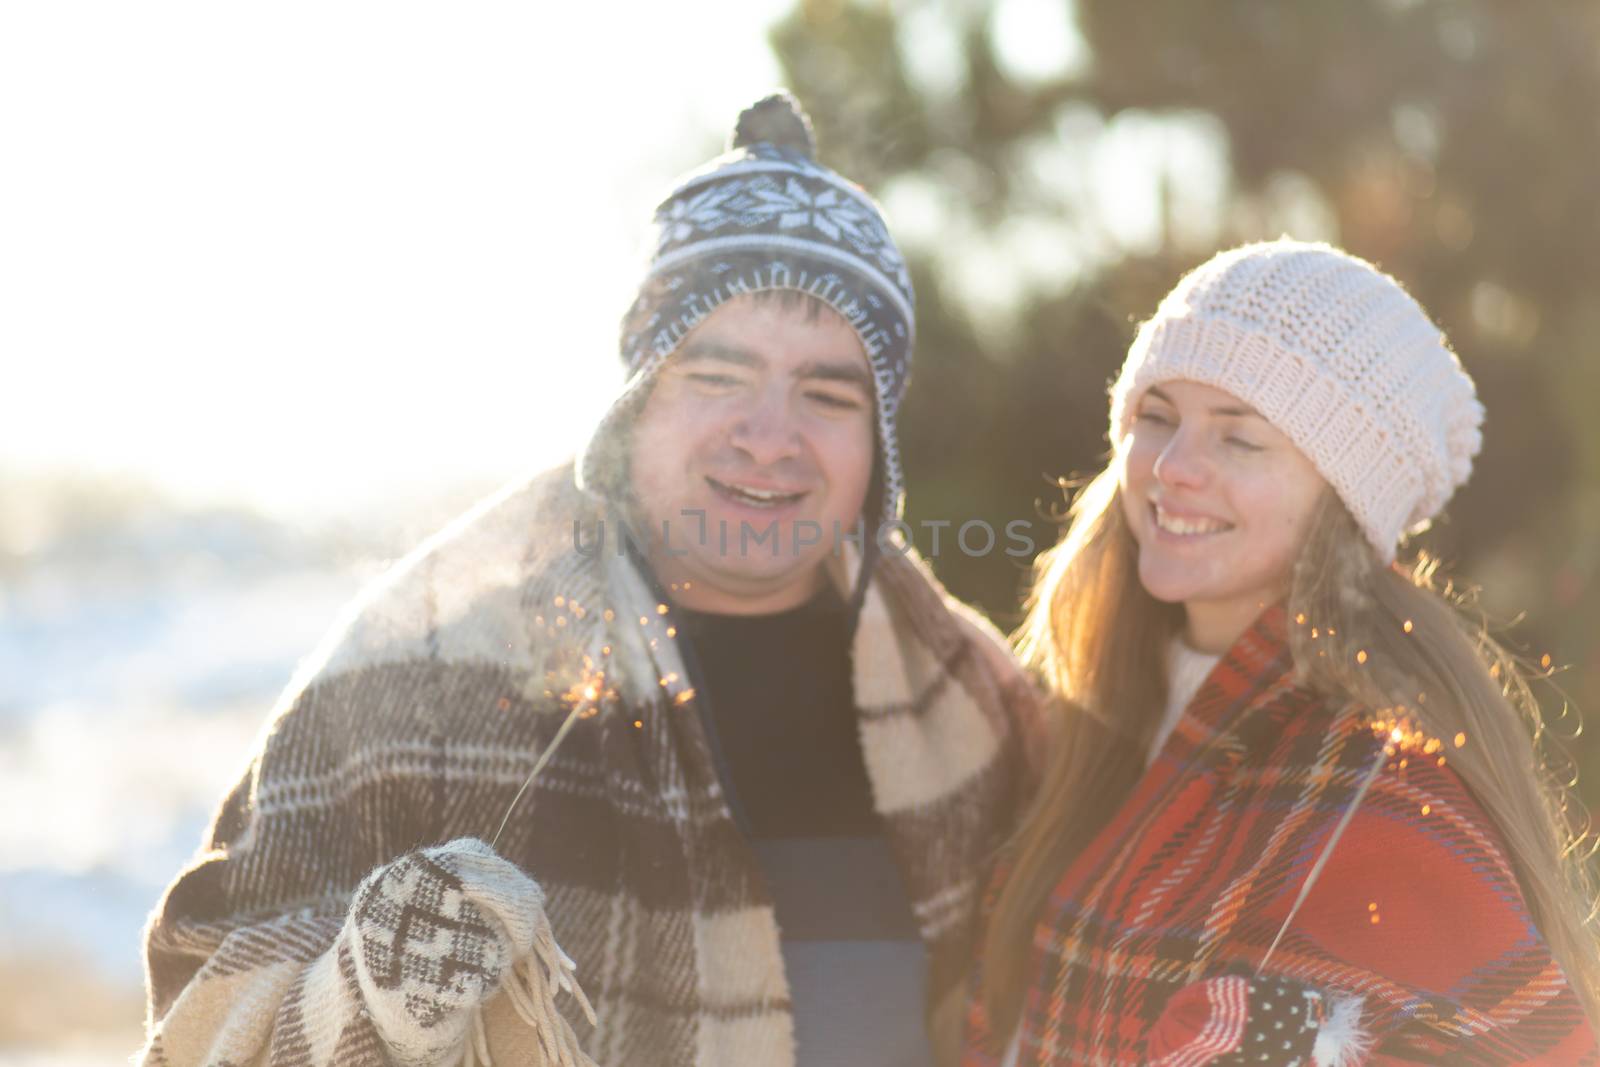 A loving couple in warm plaids kisses holding sparklers in their hands. Meet the winter holidays in a snowy forest.